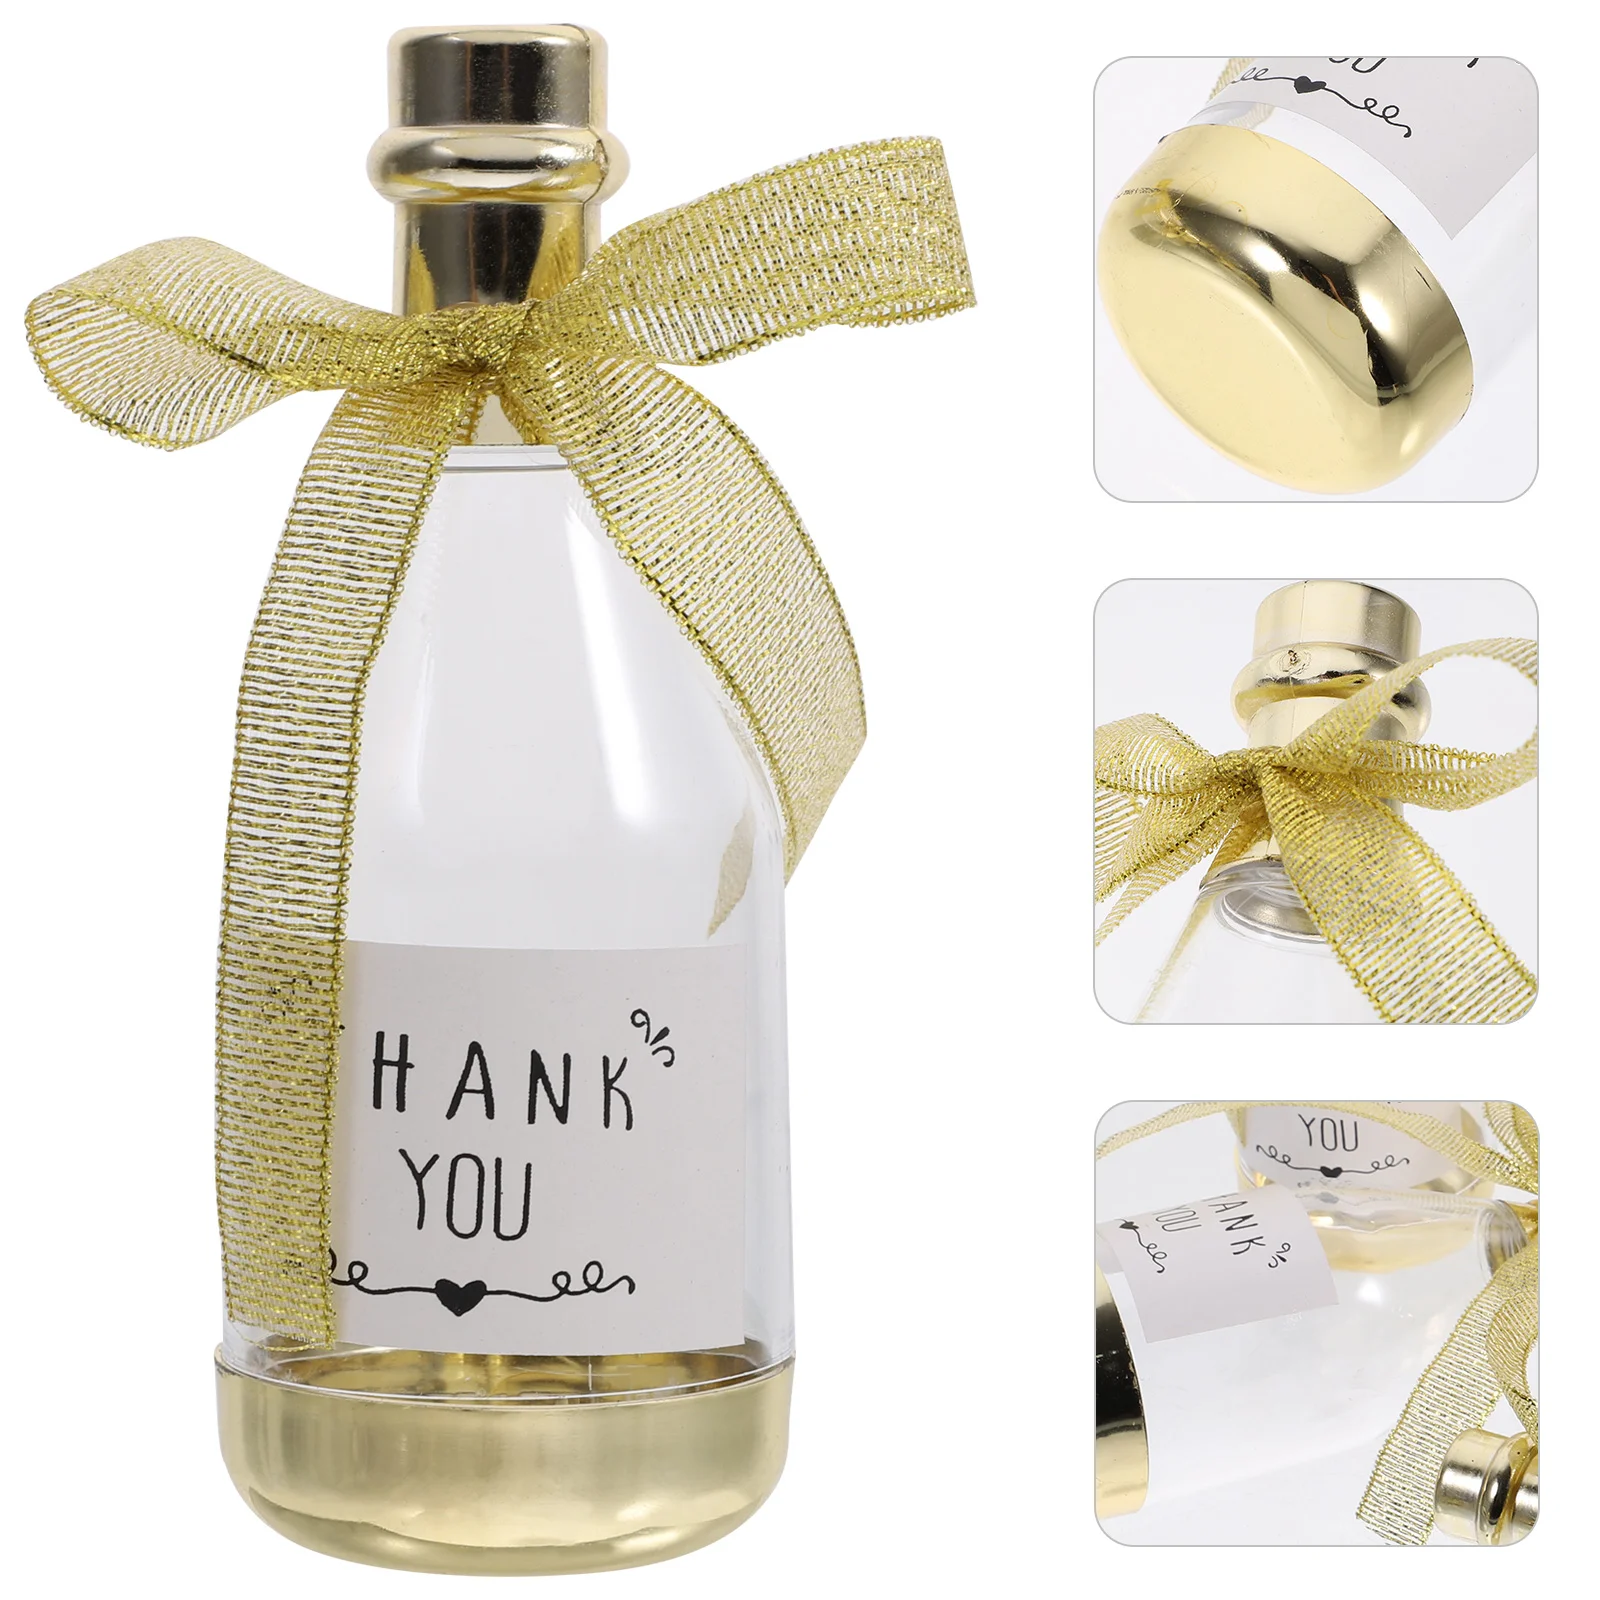 

12 Pcs Cookie Box Wedding Favors Small Champagne Bottle Treat Containers Ps Bride